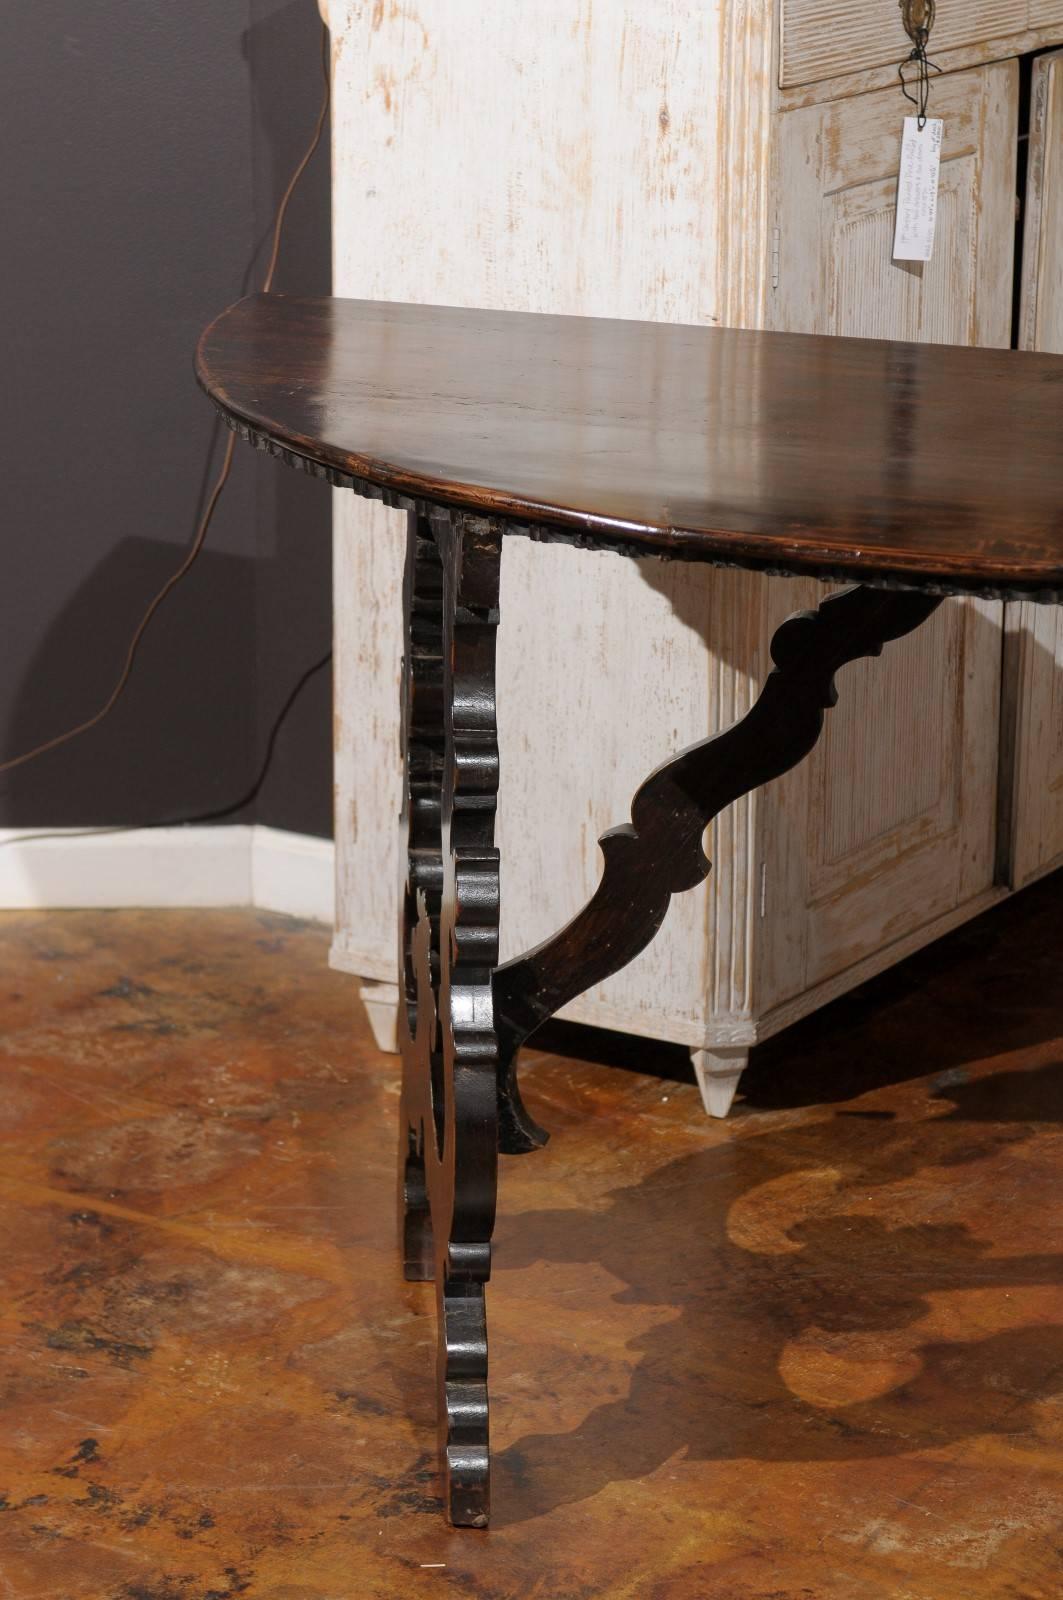 A pair of Tuscan Baroque style demi-lune console tables with lyre shaped legs from the mid 18th century. This pair of Italian carved walnut demi-lune tables features semi-circular tops over exquisitely carved lyre-shaped angled legs, reminiscent of